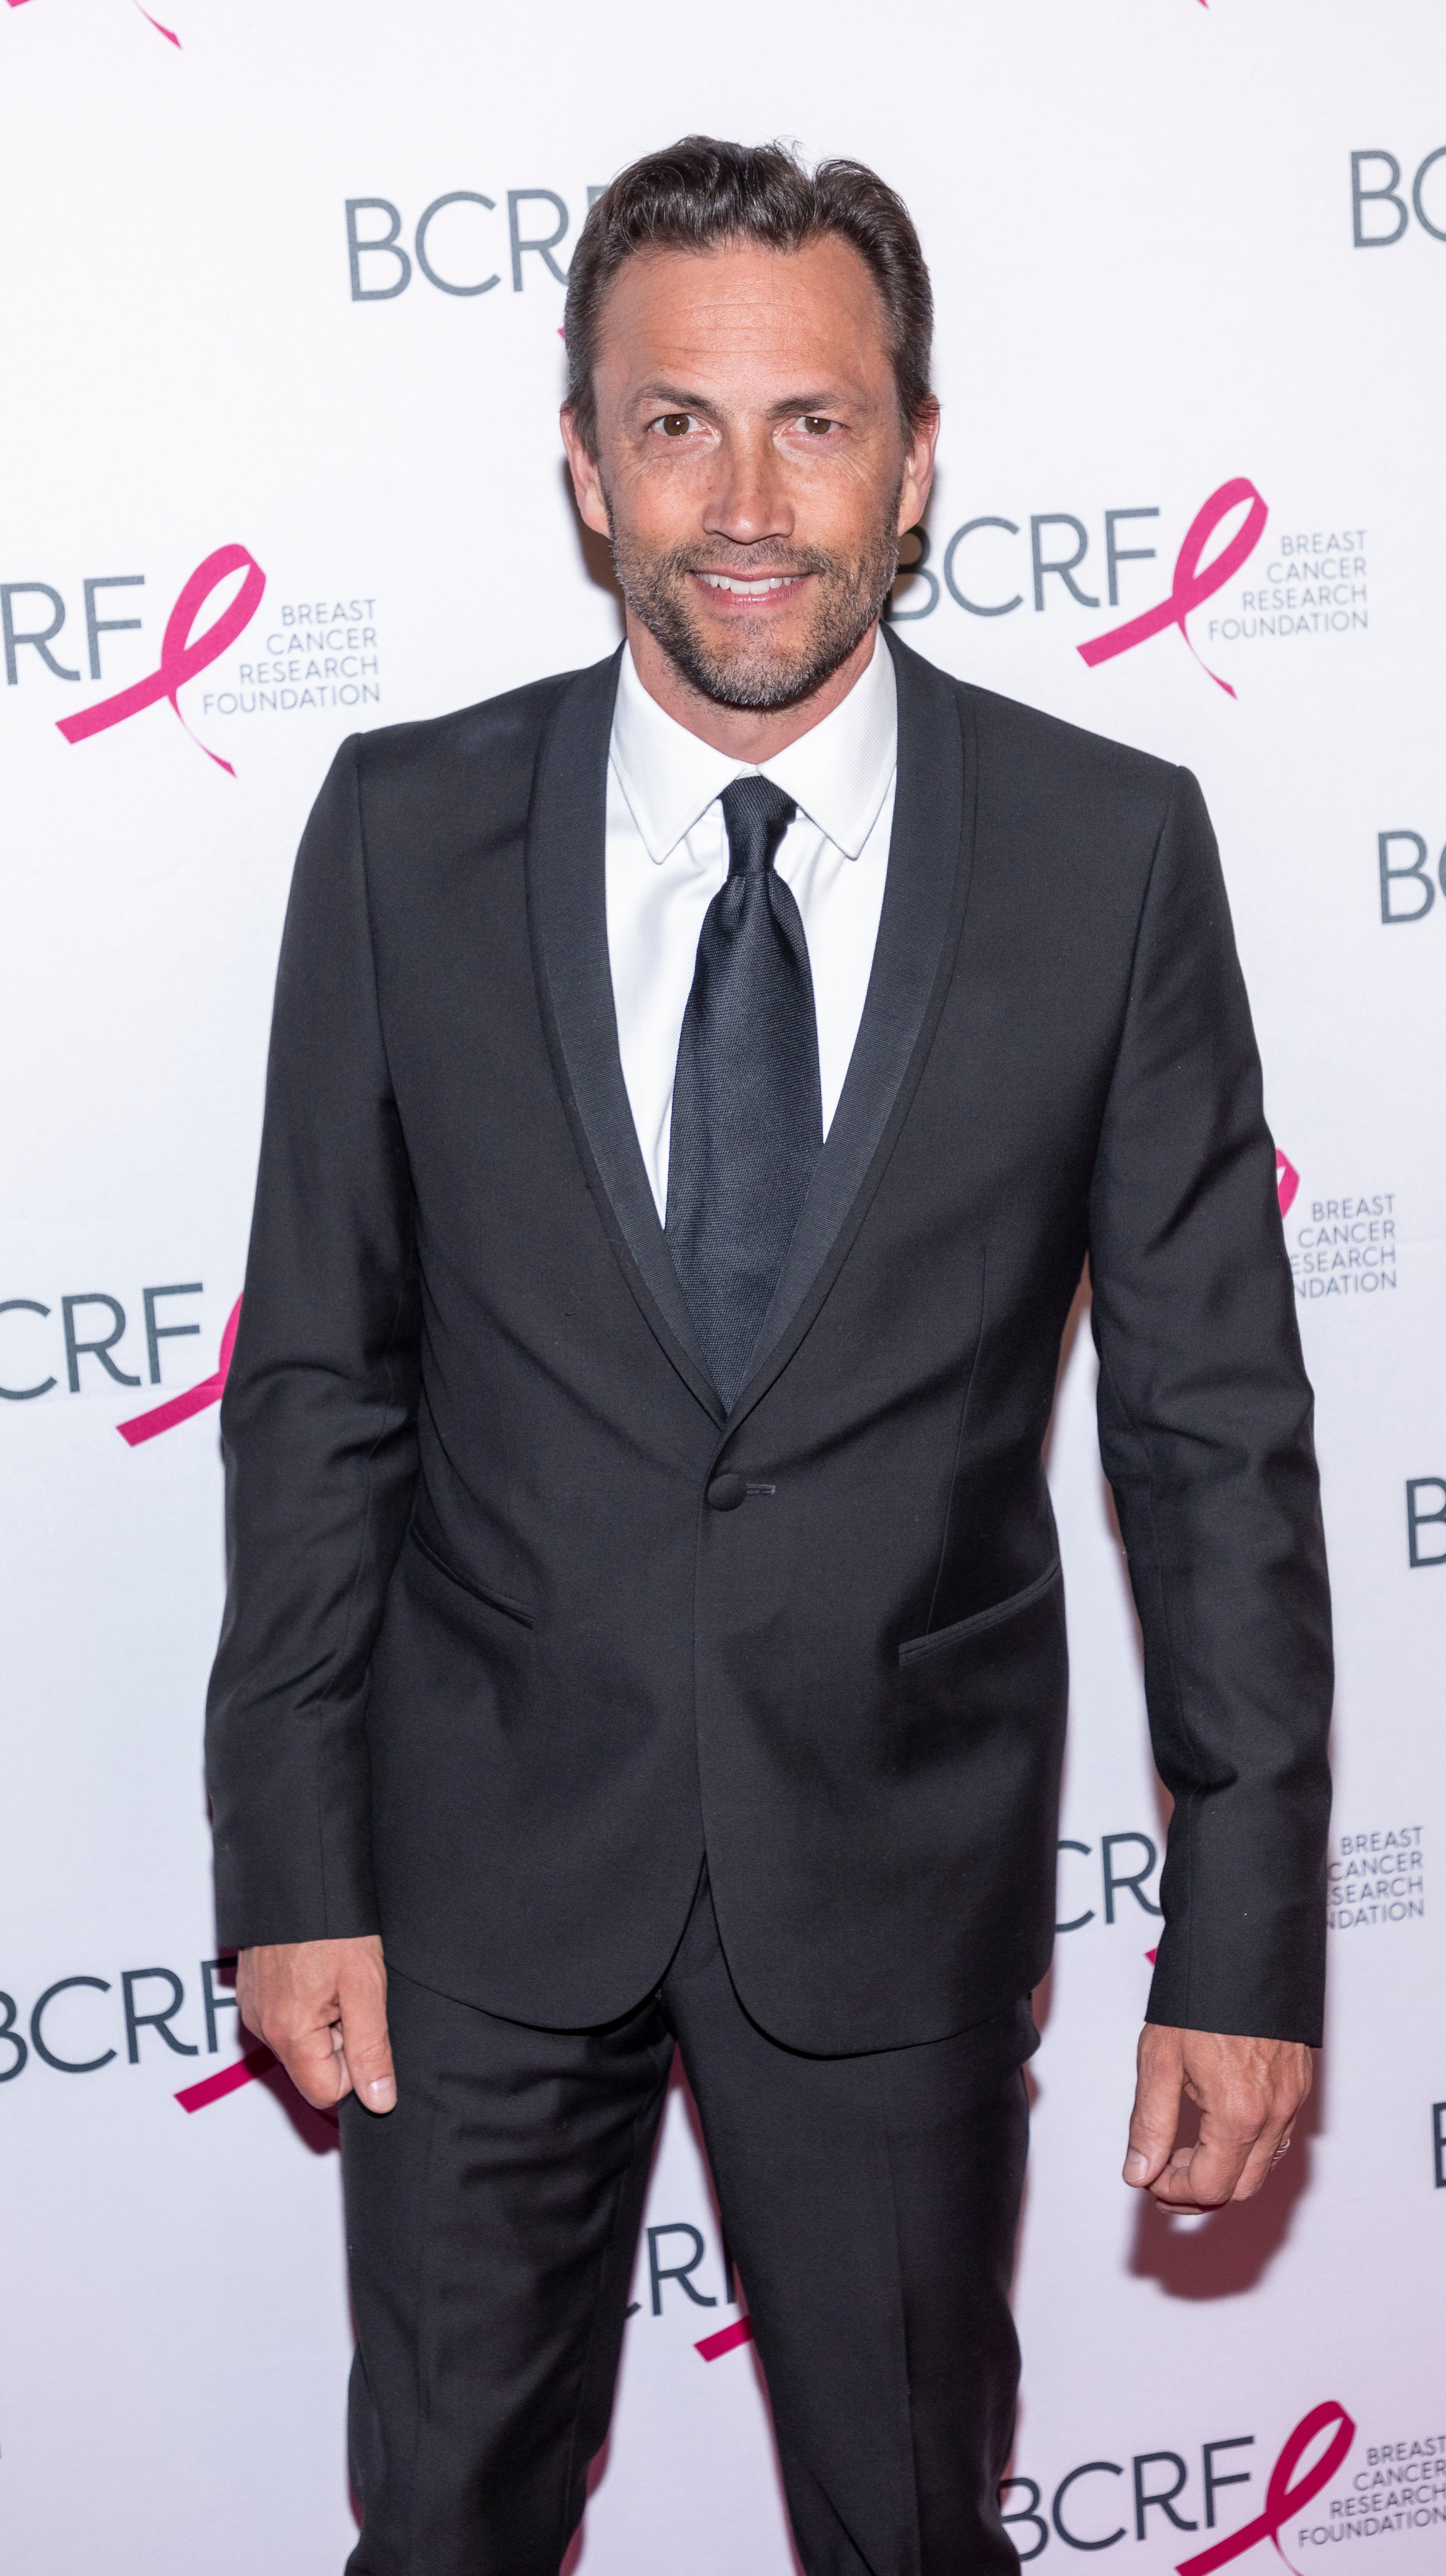 Andrew Shue pictured at the BCRF Hot Pink Party, 2019. | Photo: Shutterstock